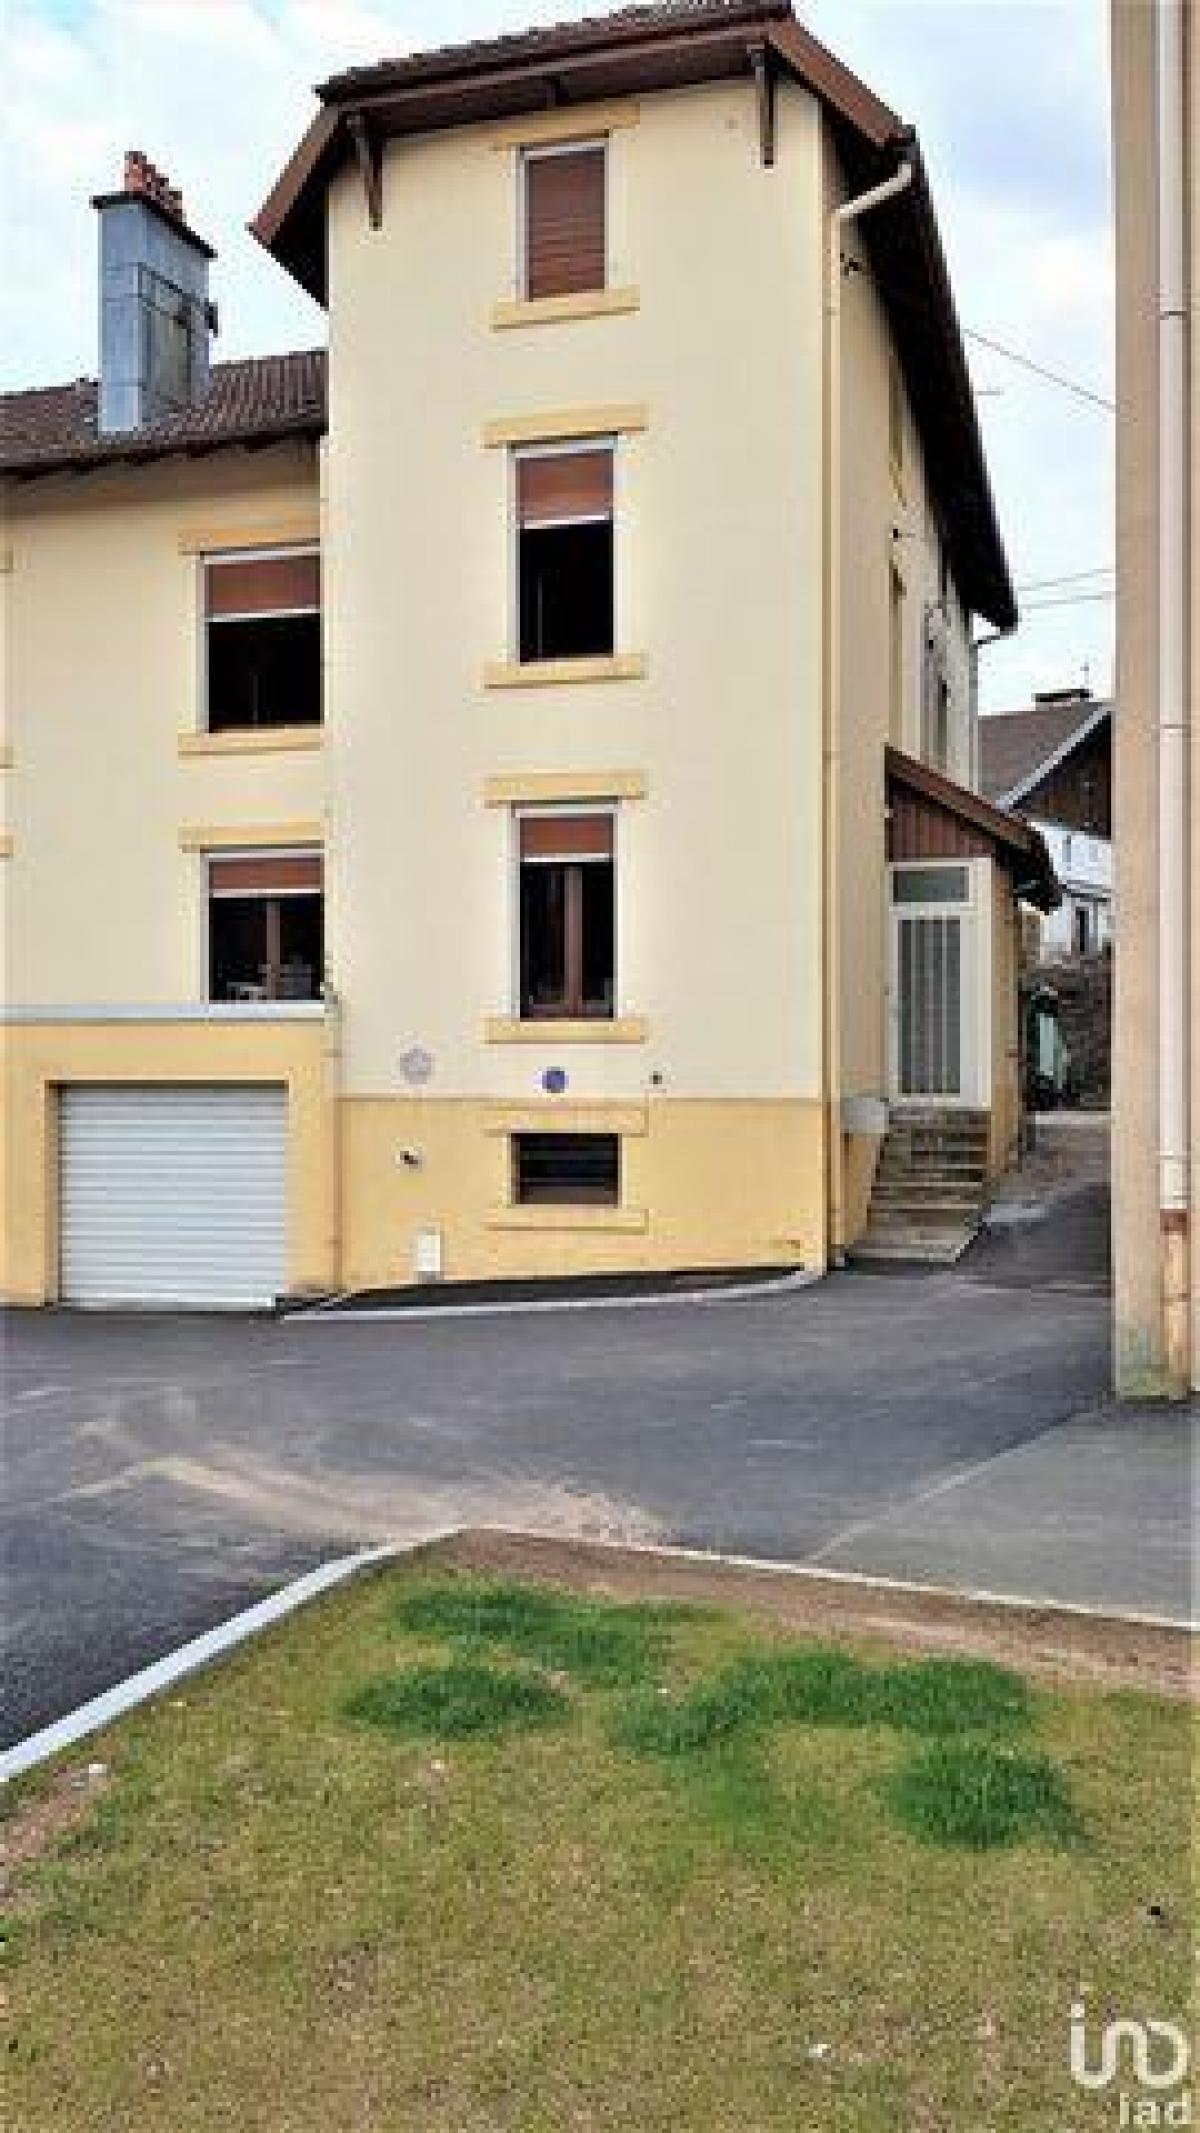 Picture of Condo For Sale in Vagney, Lorraine, France